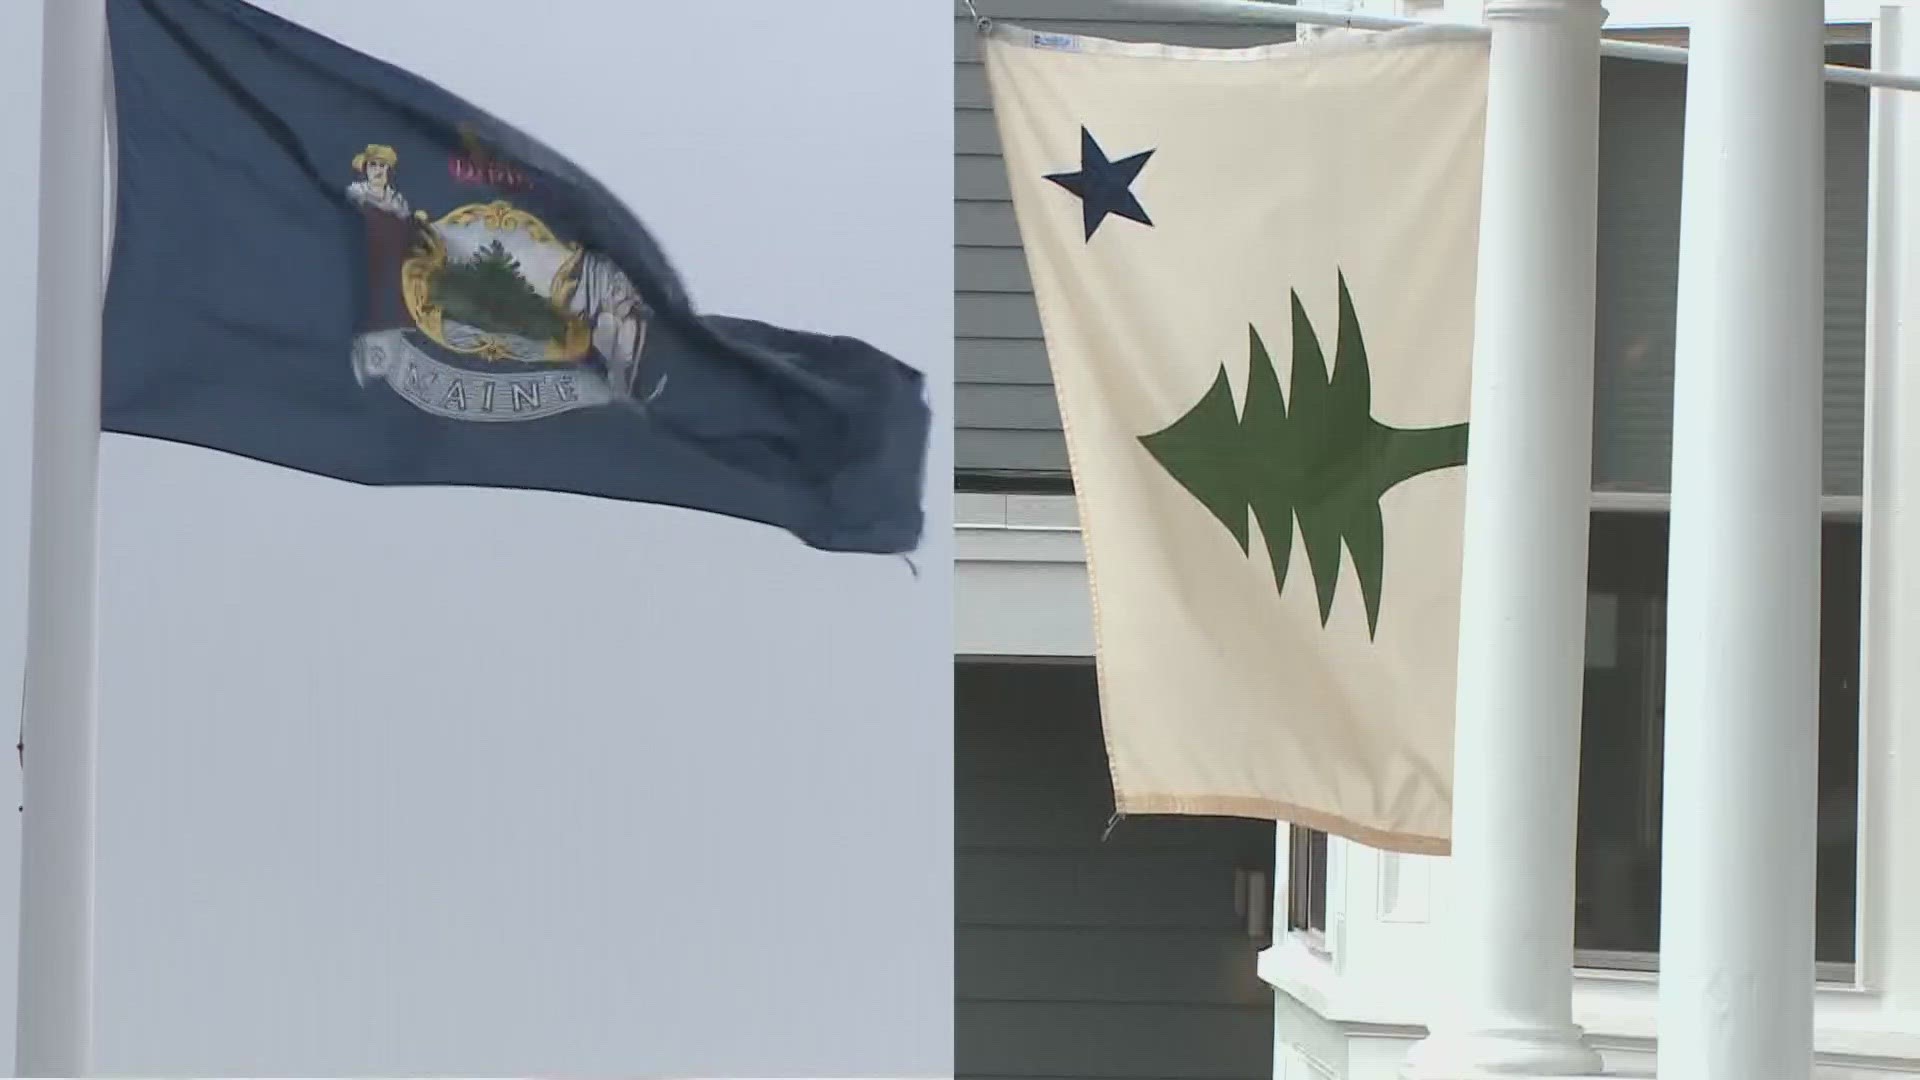 Despite previous failures, support has continued for Maine’s original flag that waved from 1901-1909.